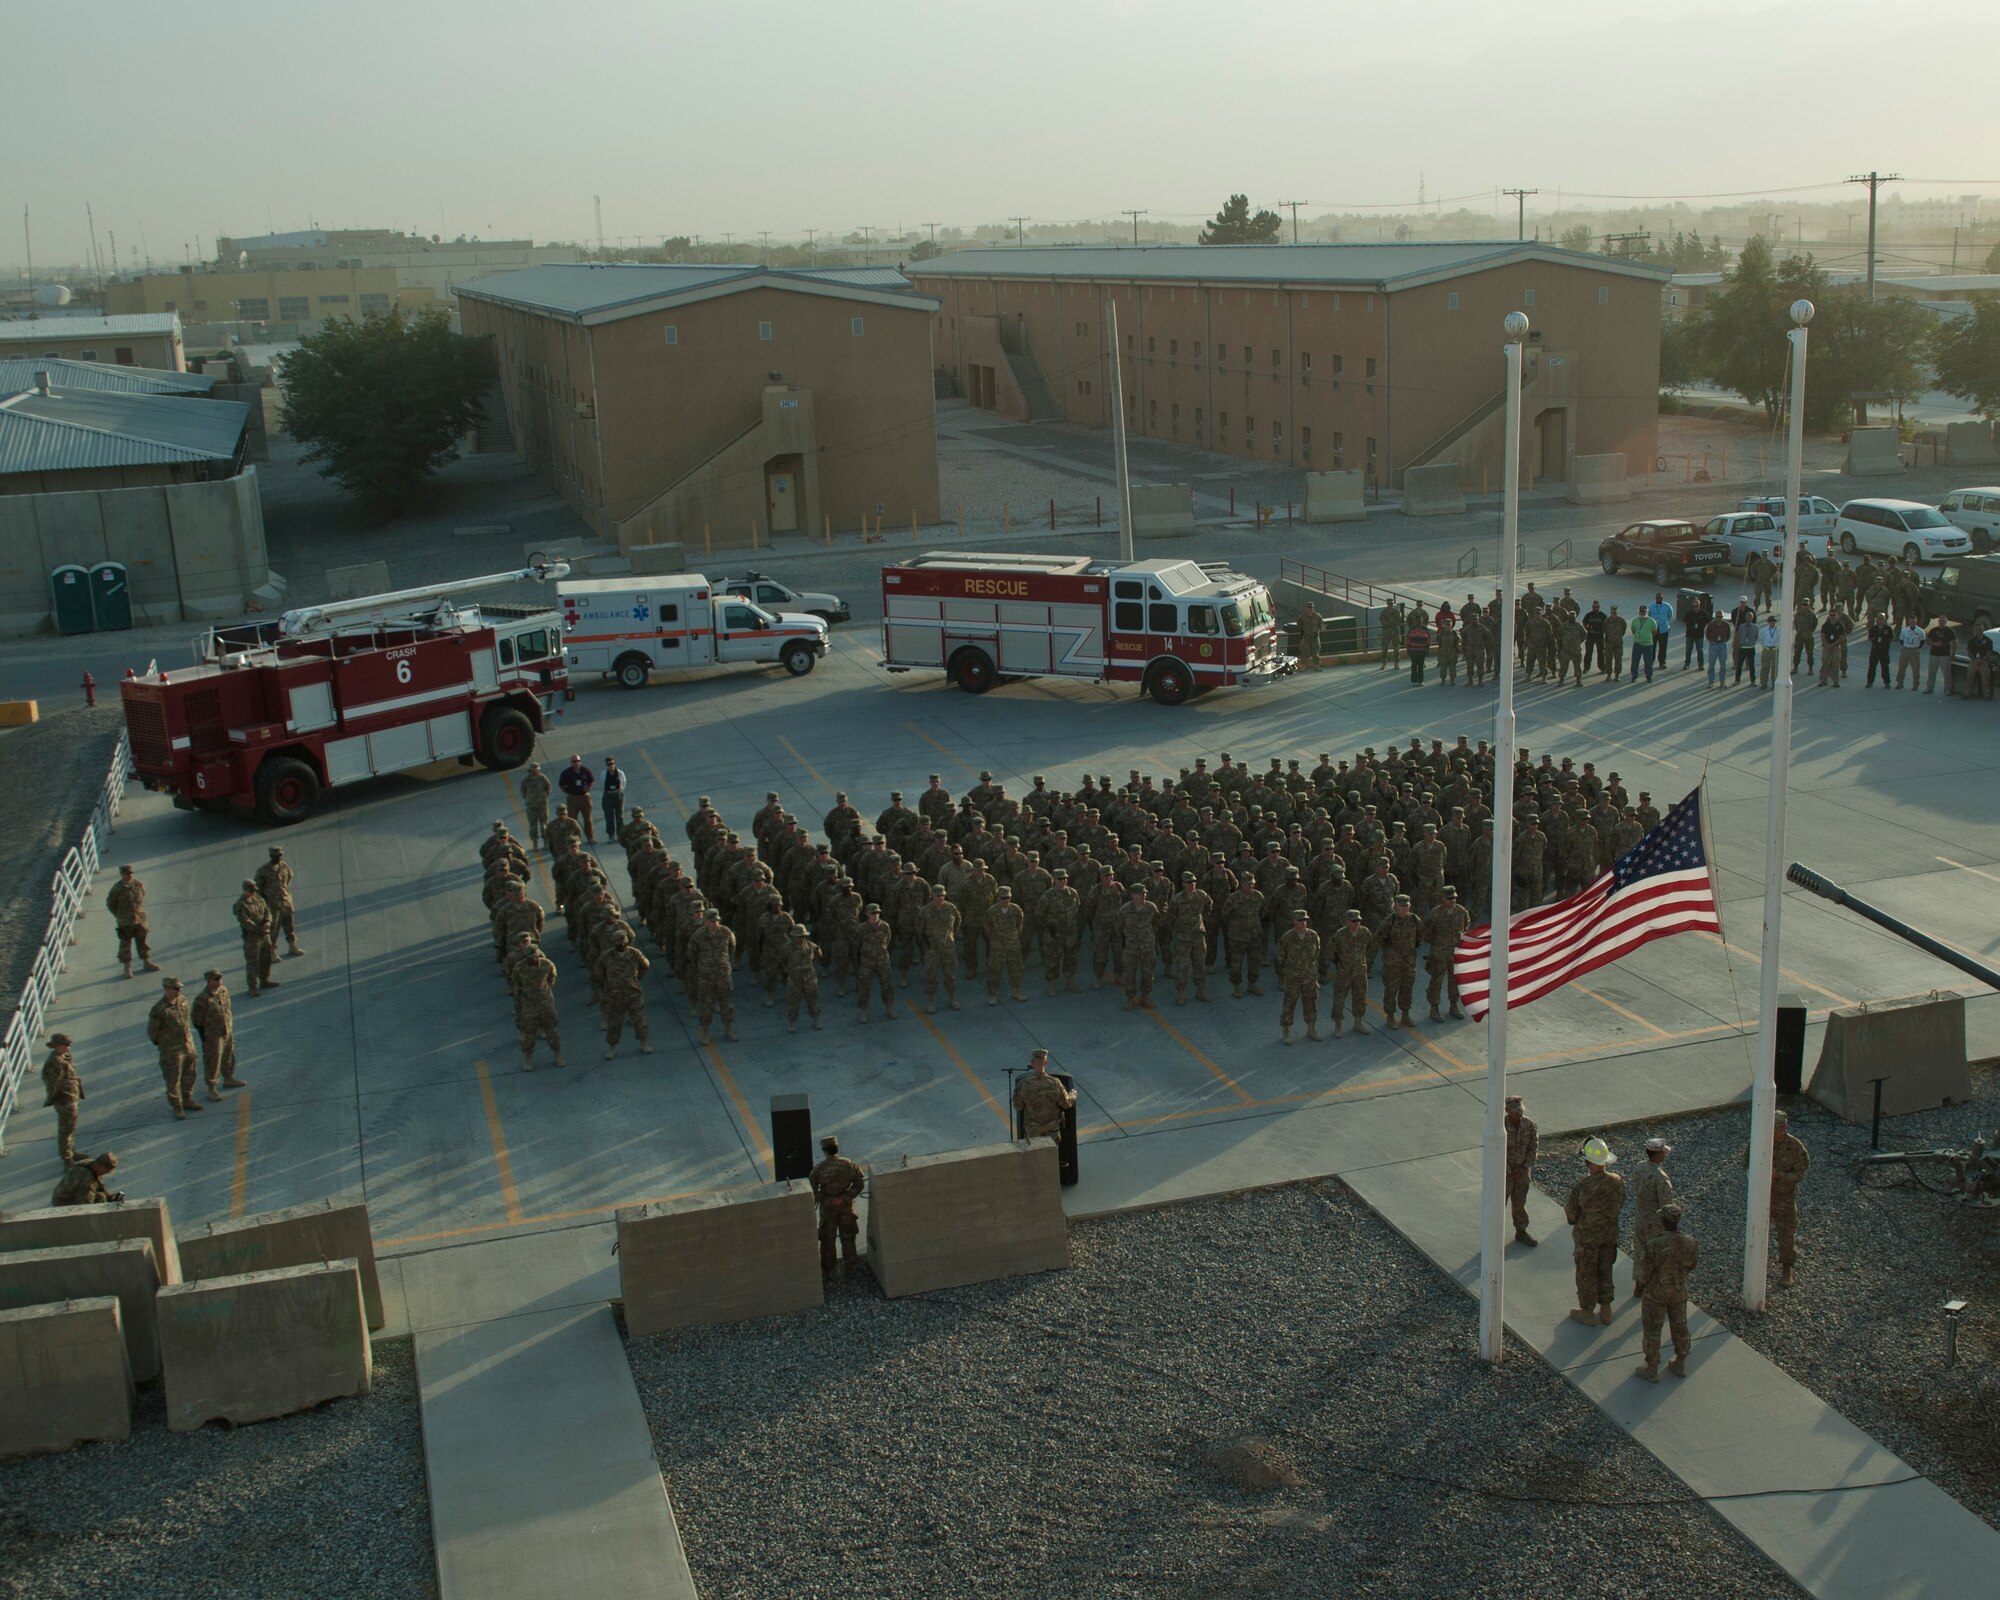 Servicemembers and civilians at Bagram Airfield, Afghanistan gathered to hold a 9/11 remembrance ceremony, Sept. 11, 2016. The ceremony involved a joint service honor guard  that conducted a retreat to remember those who gave their lives 15 years ago. (U.S. Air Force photo by Capt. Korey Fratini)